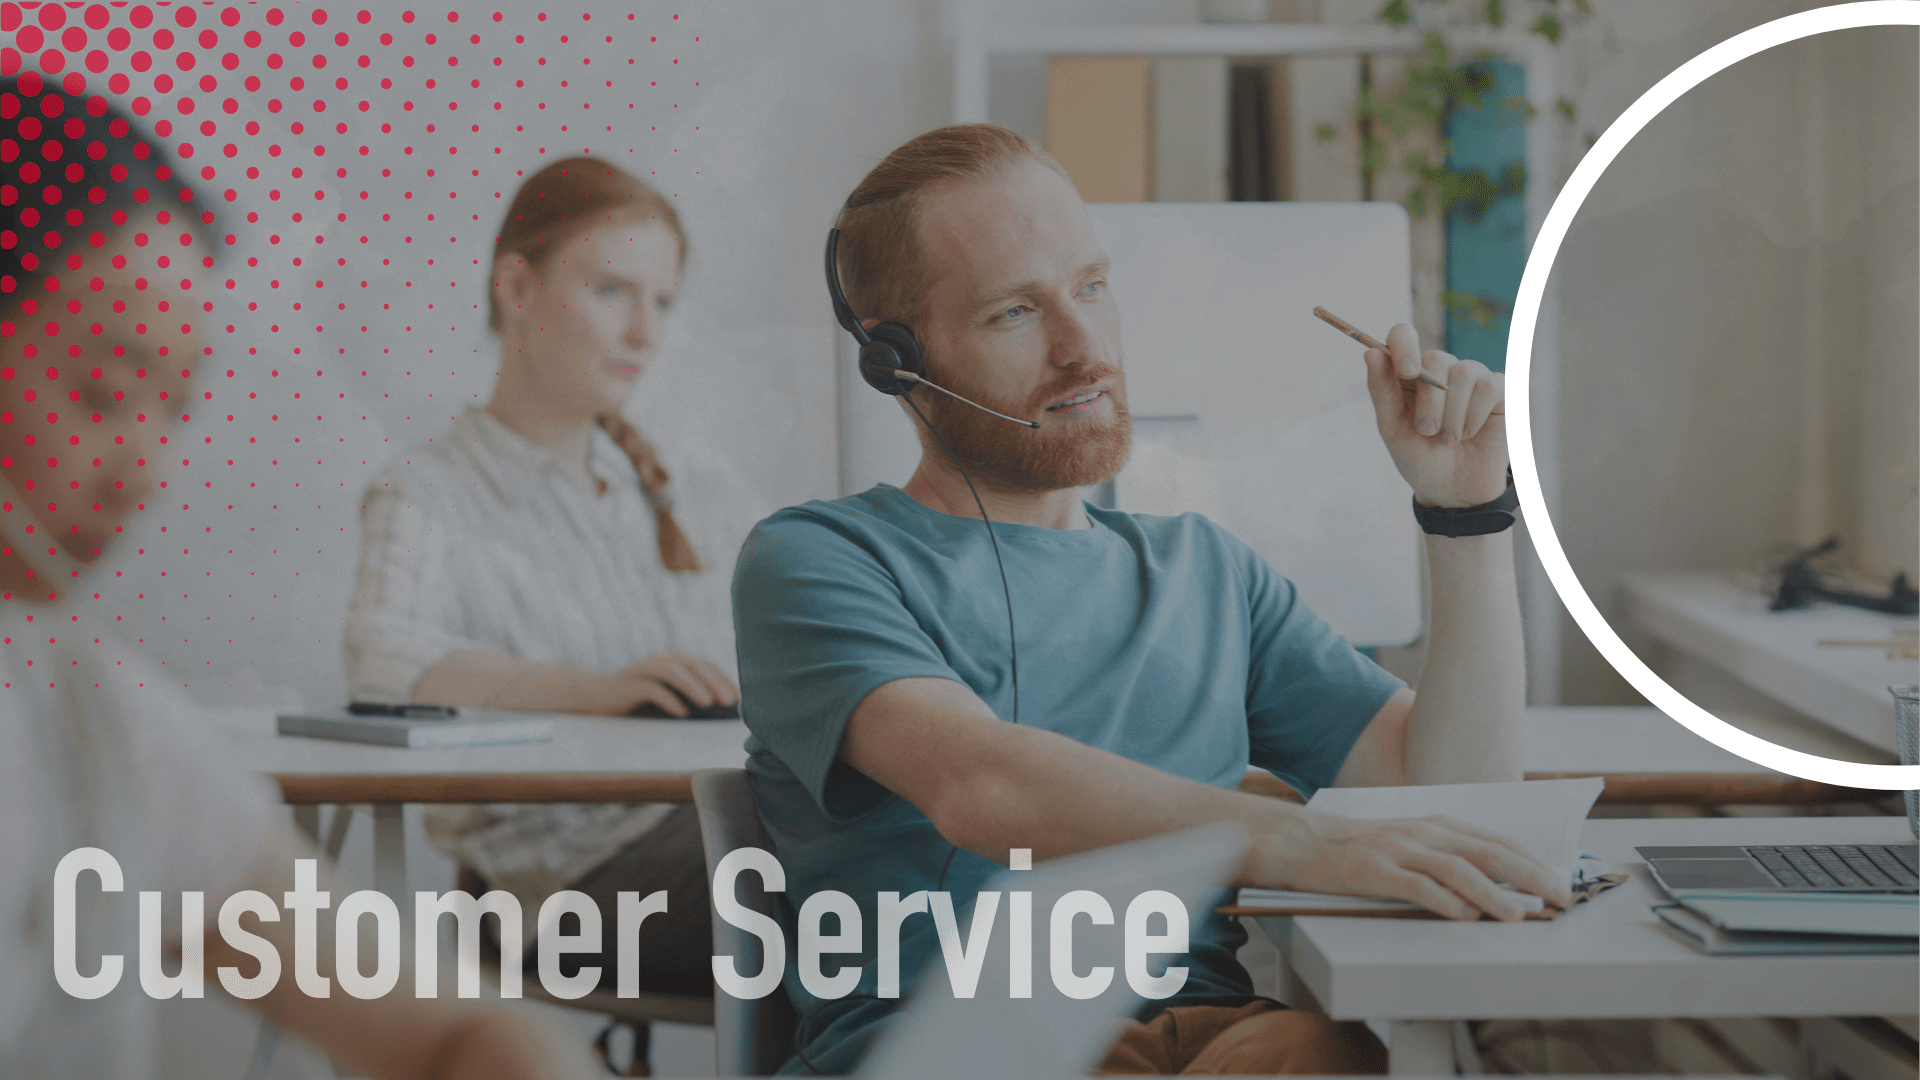 The Customer Service Curriculum is designed to help you to provide exceptional customer service.